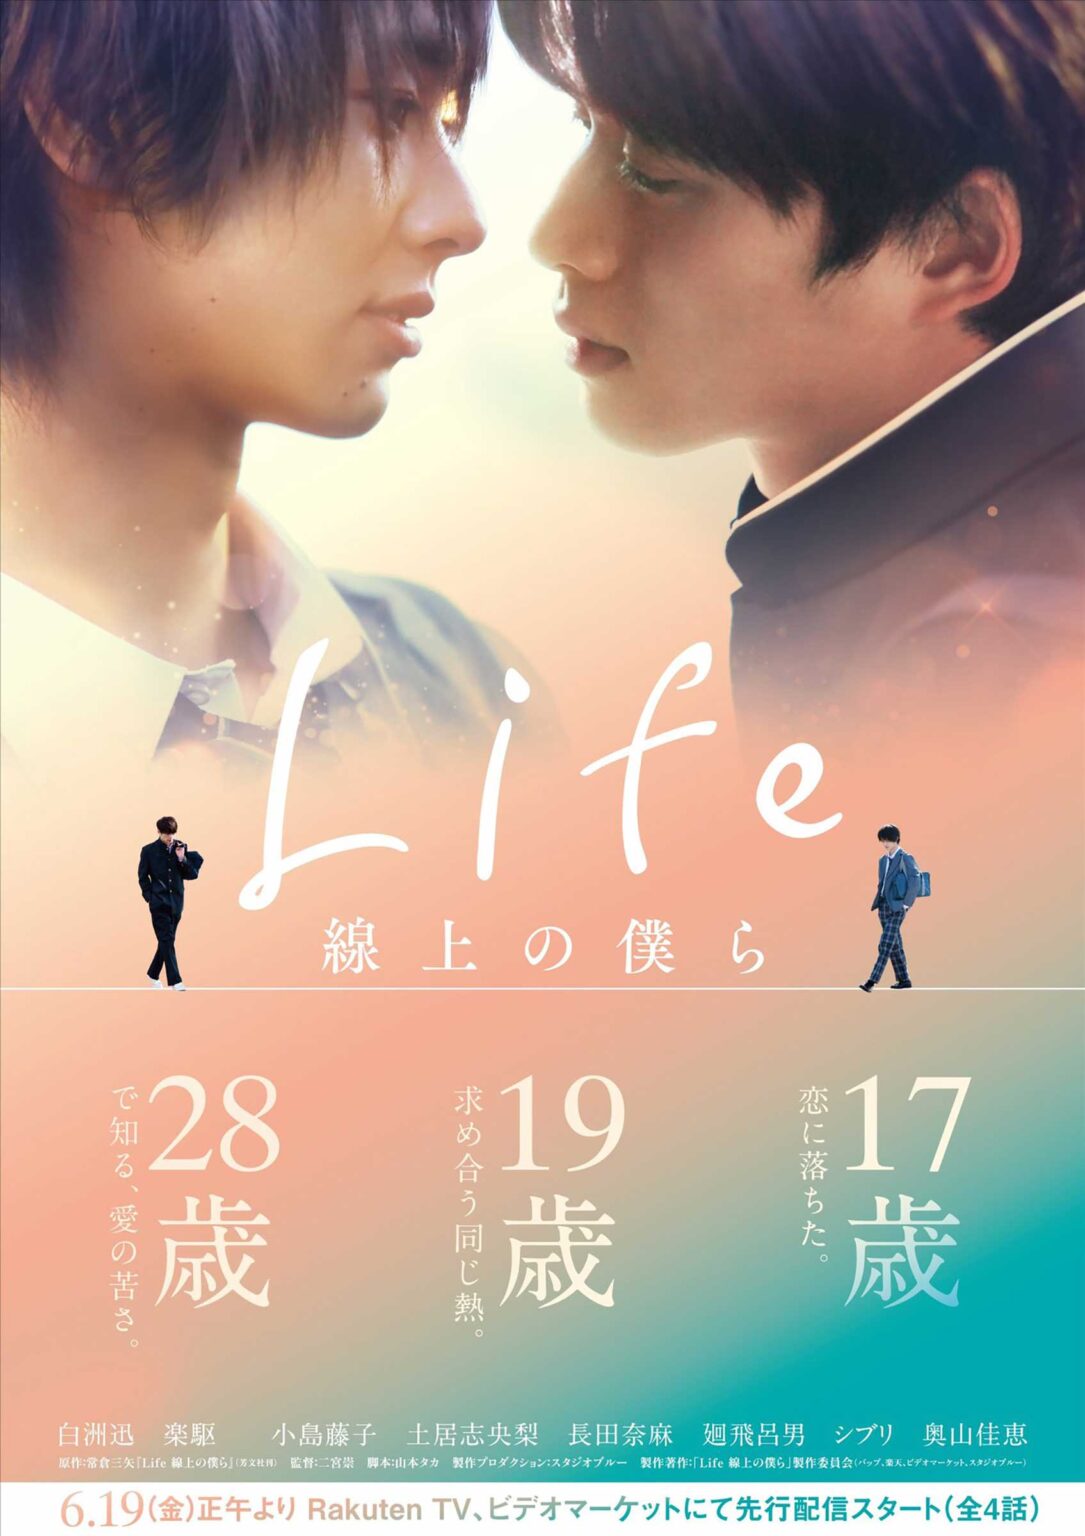 Japan is no stranger to successful Boy Love (BL) productions. Here is everything you need to know about 'Life-Love on the Line'.